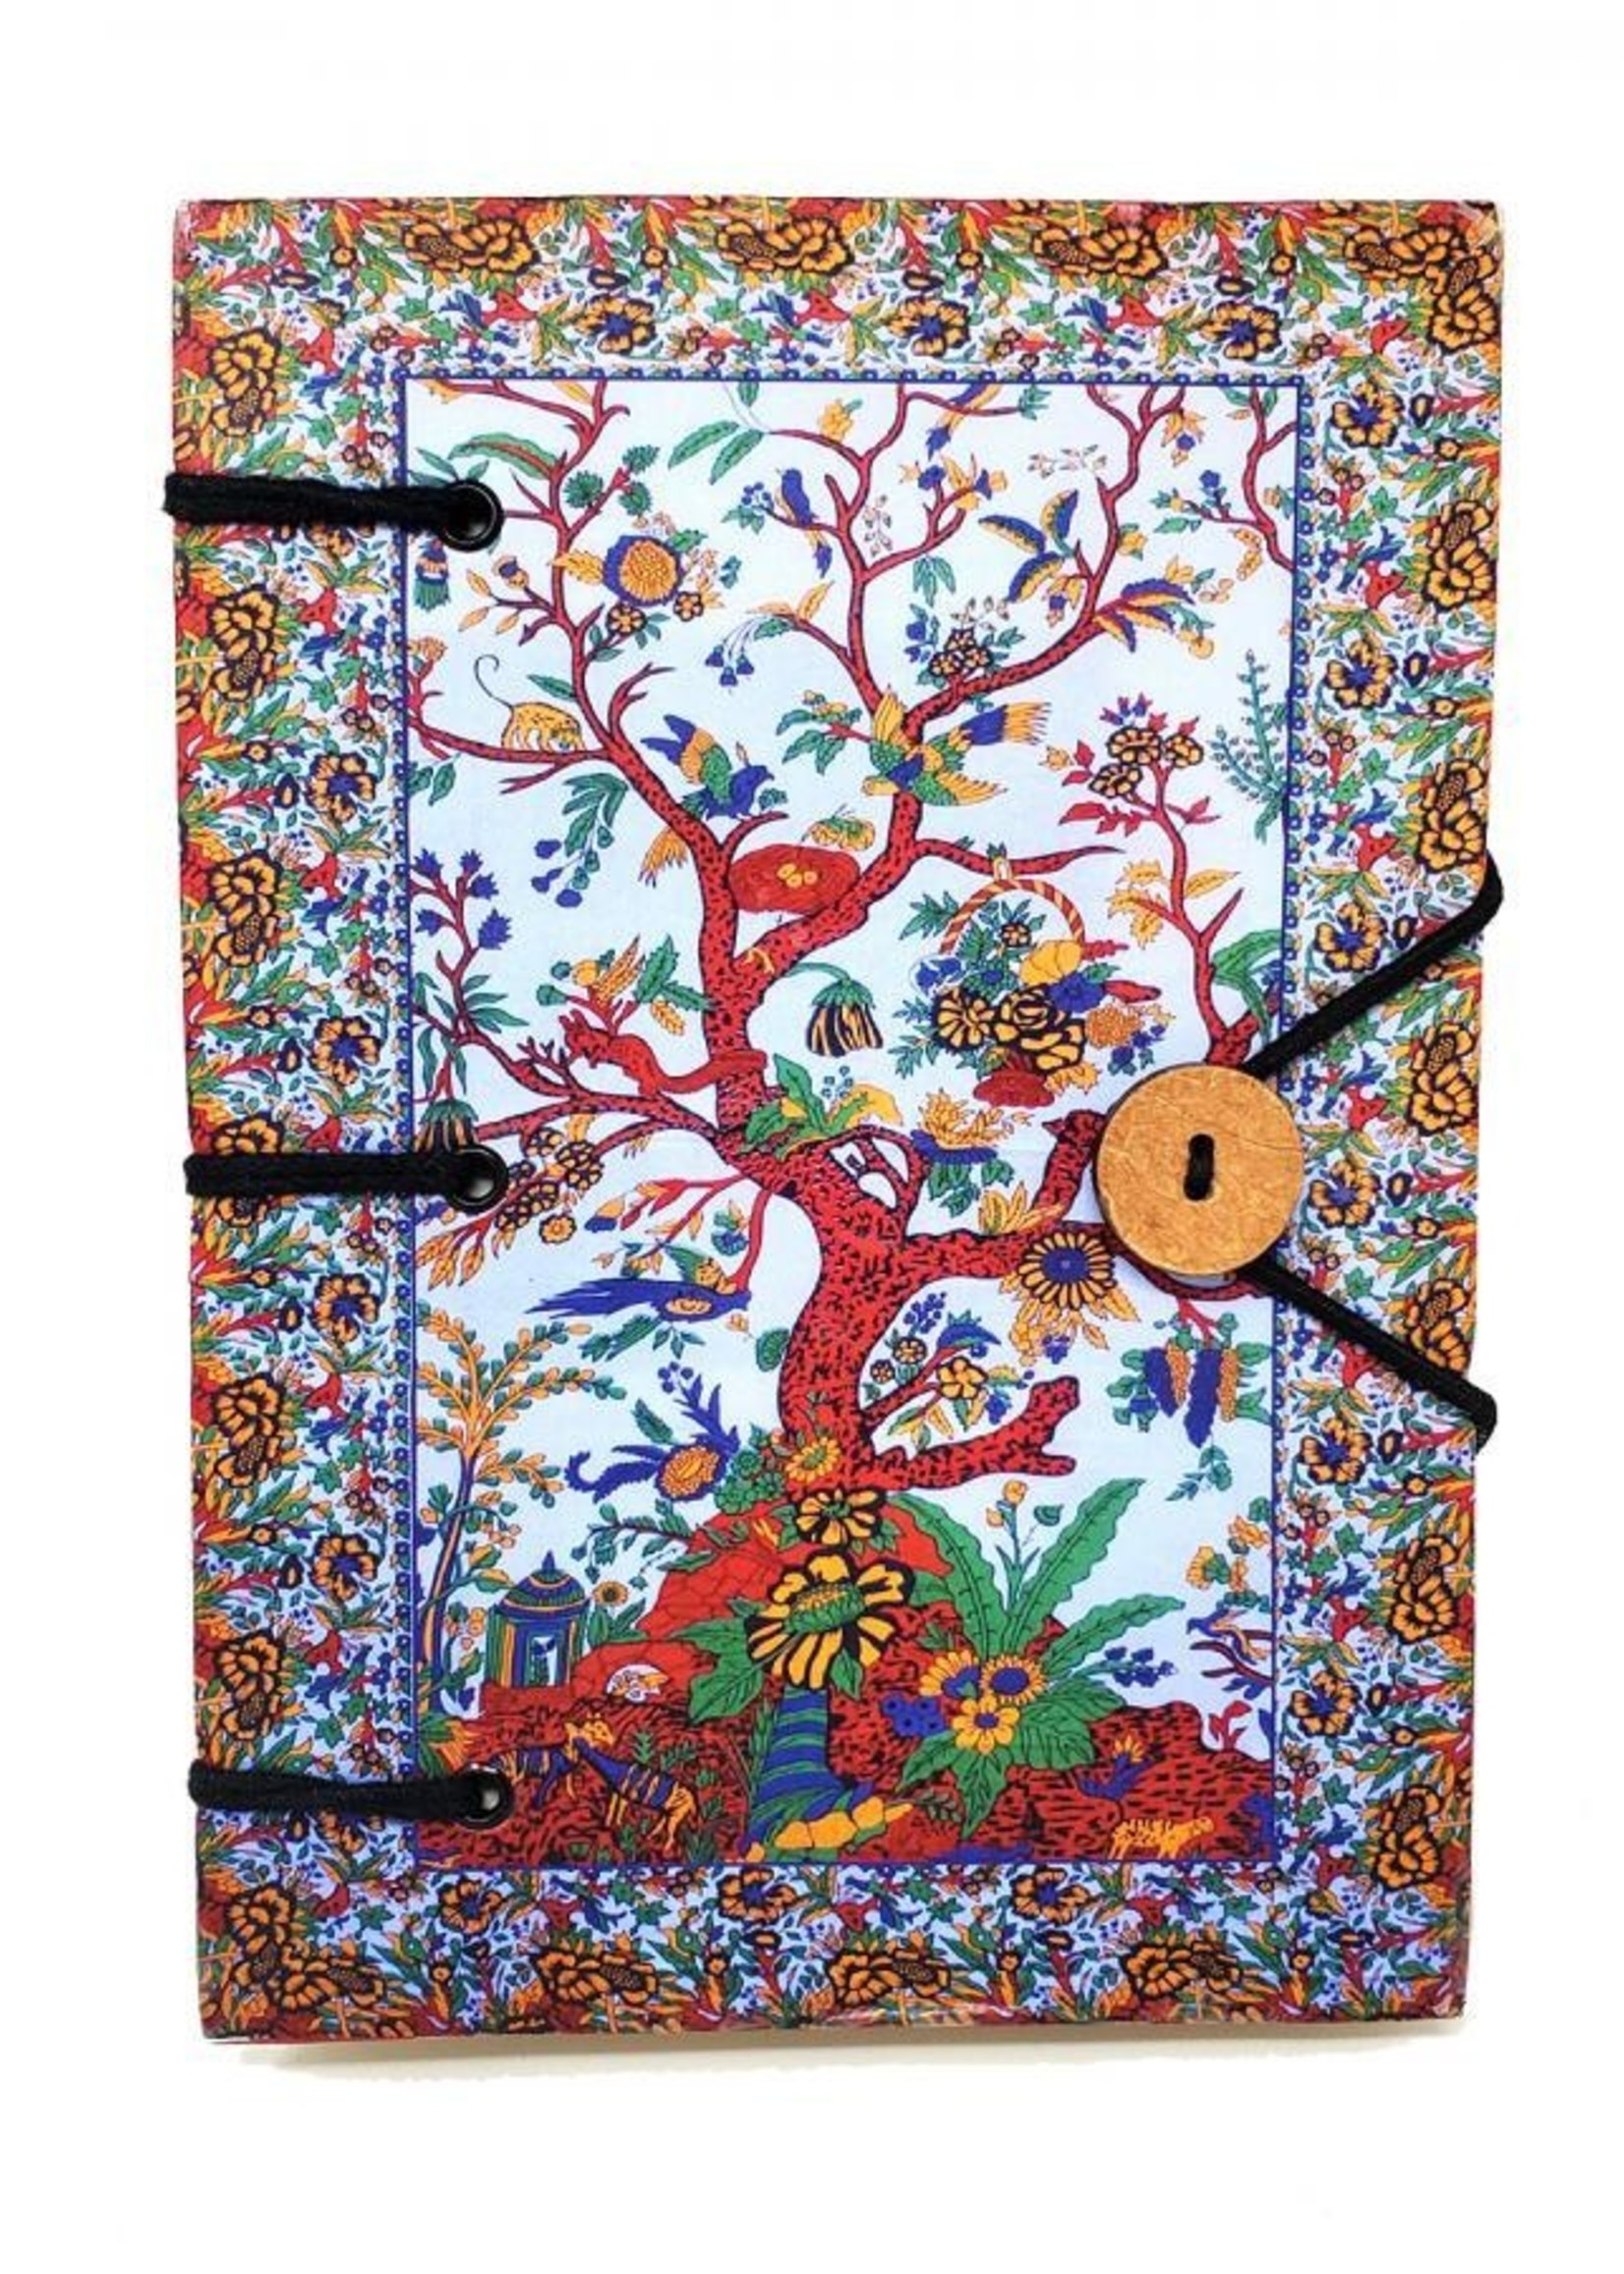 Tree of Life Printed Hardcover Journal 5x7"